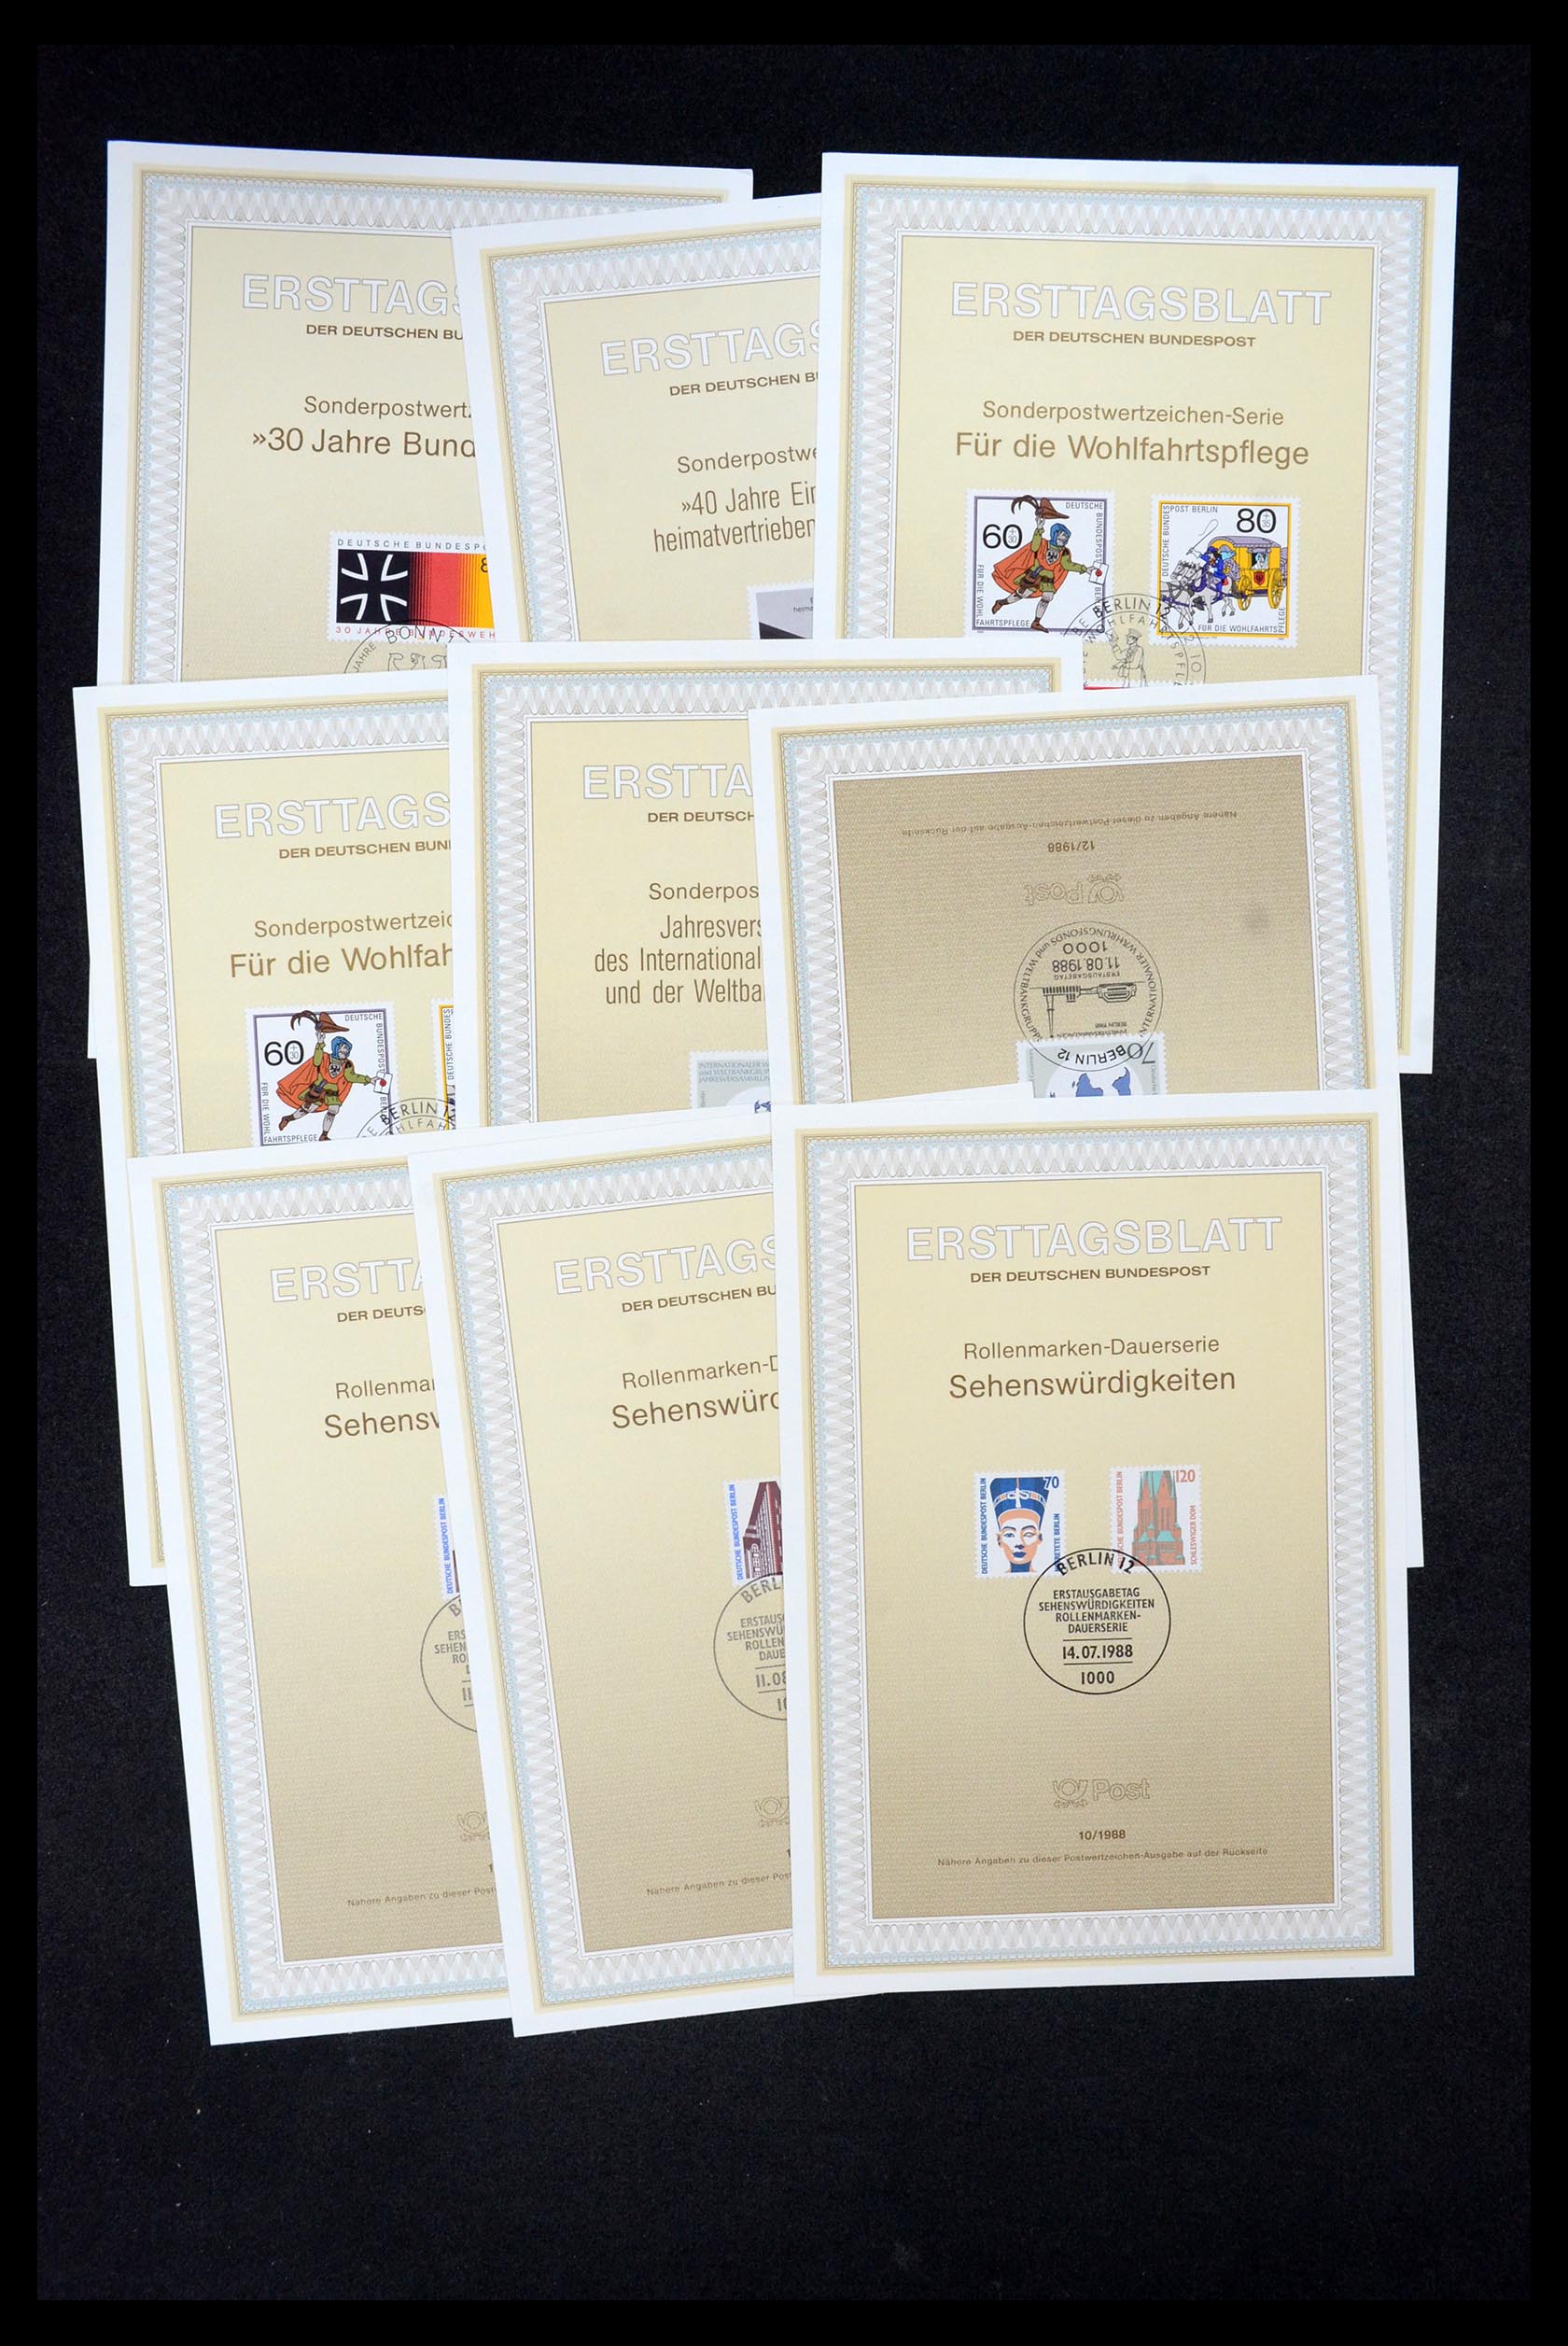 35492 258 - Stamp Collection 35492 Bundespost first day sheets 1975-2016!